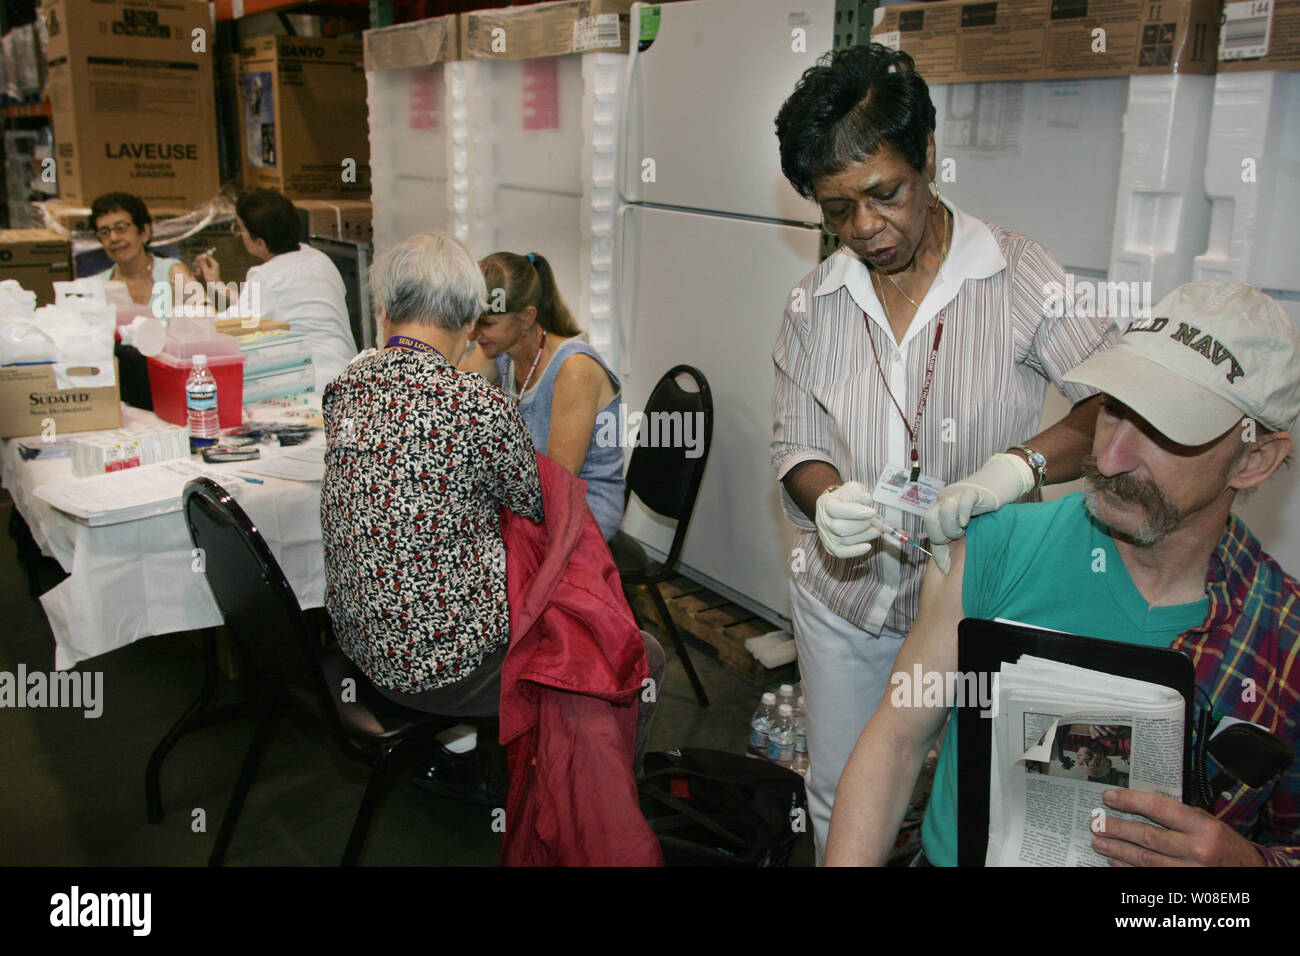 Nurse Betty Davis (R) gives a vaccination at a flu shot clinic held at Costco in San Francisco, CA, on October 13, 2004.  People began arriving at 5am for the 10am clinic which had an estimated 400 doses. (UPI Photo/Terry Schmitt) Stock Photo